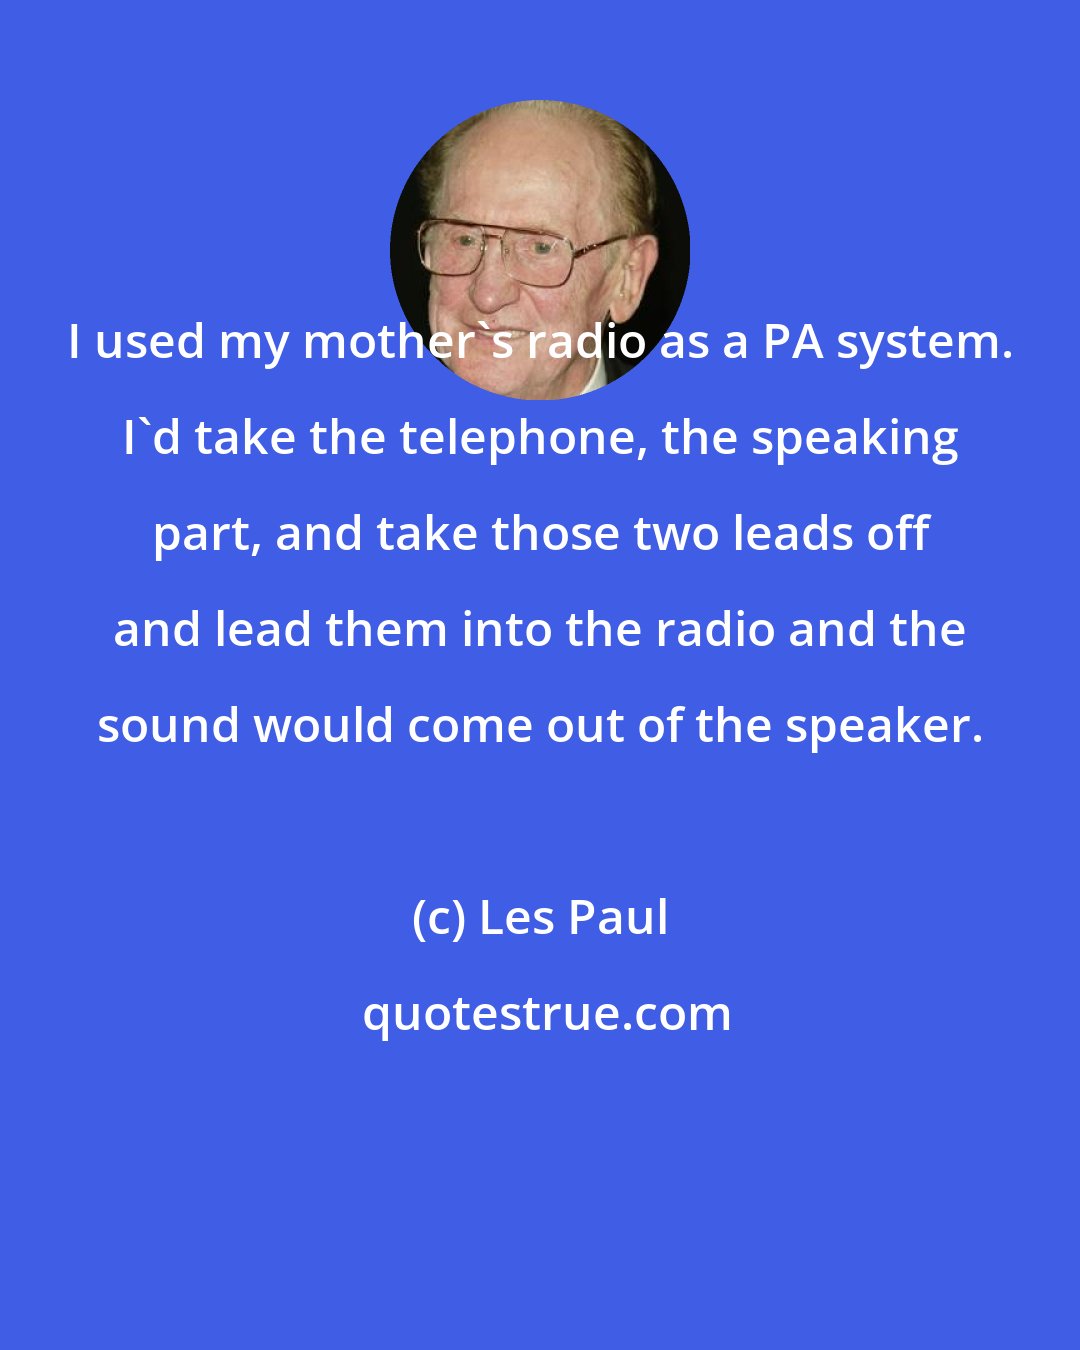 Les Paul: I used my mother's radio as a PA system. I'd take the telephone, the speaking part, and take those two leads off and lead them into the radio and the sound would come out of the speaker.